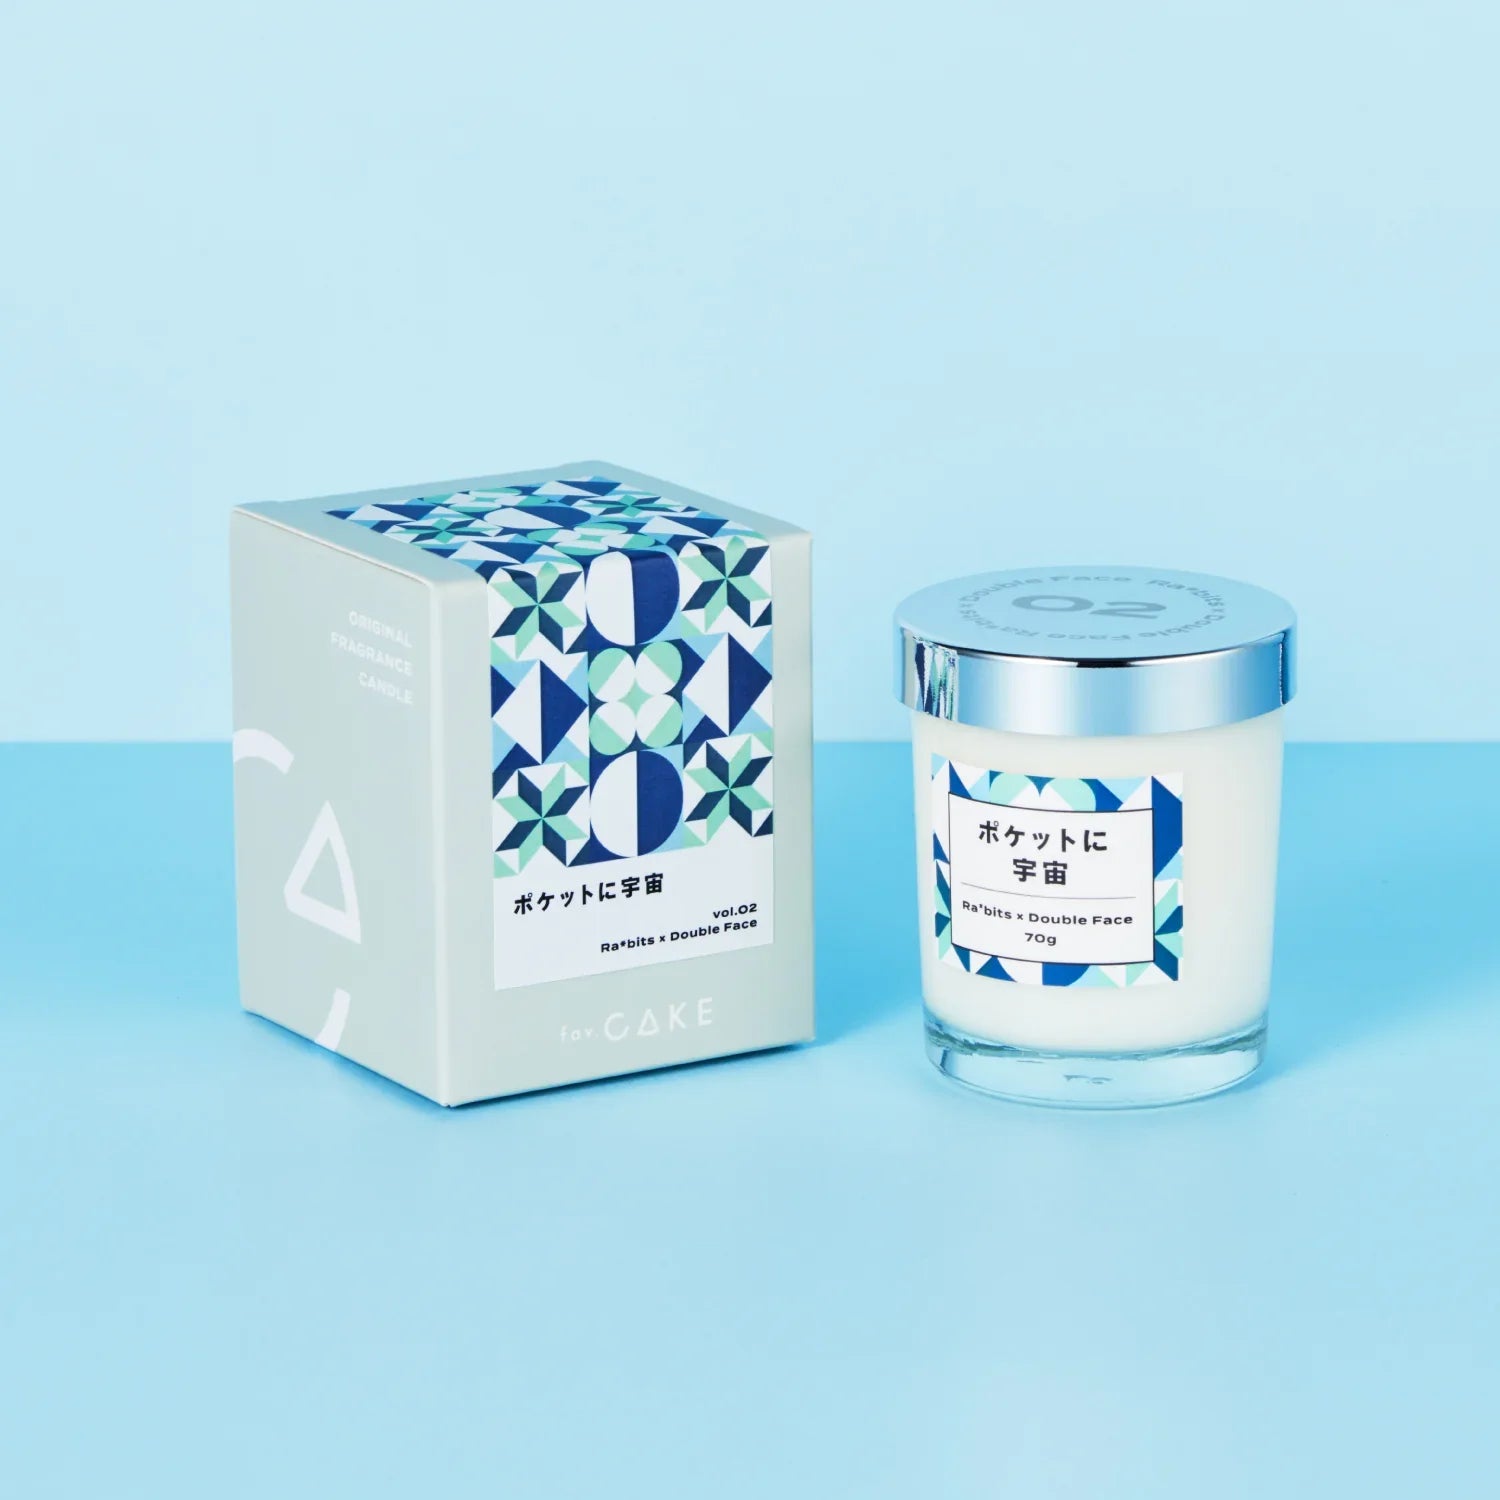 Tune Fragrance Candle -FUSION UNIT SERIES- 「ポケットに宇宙」